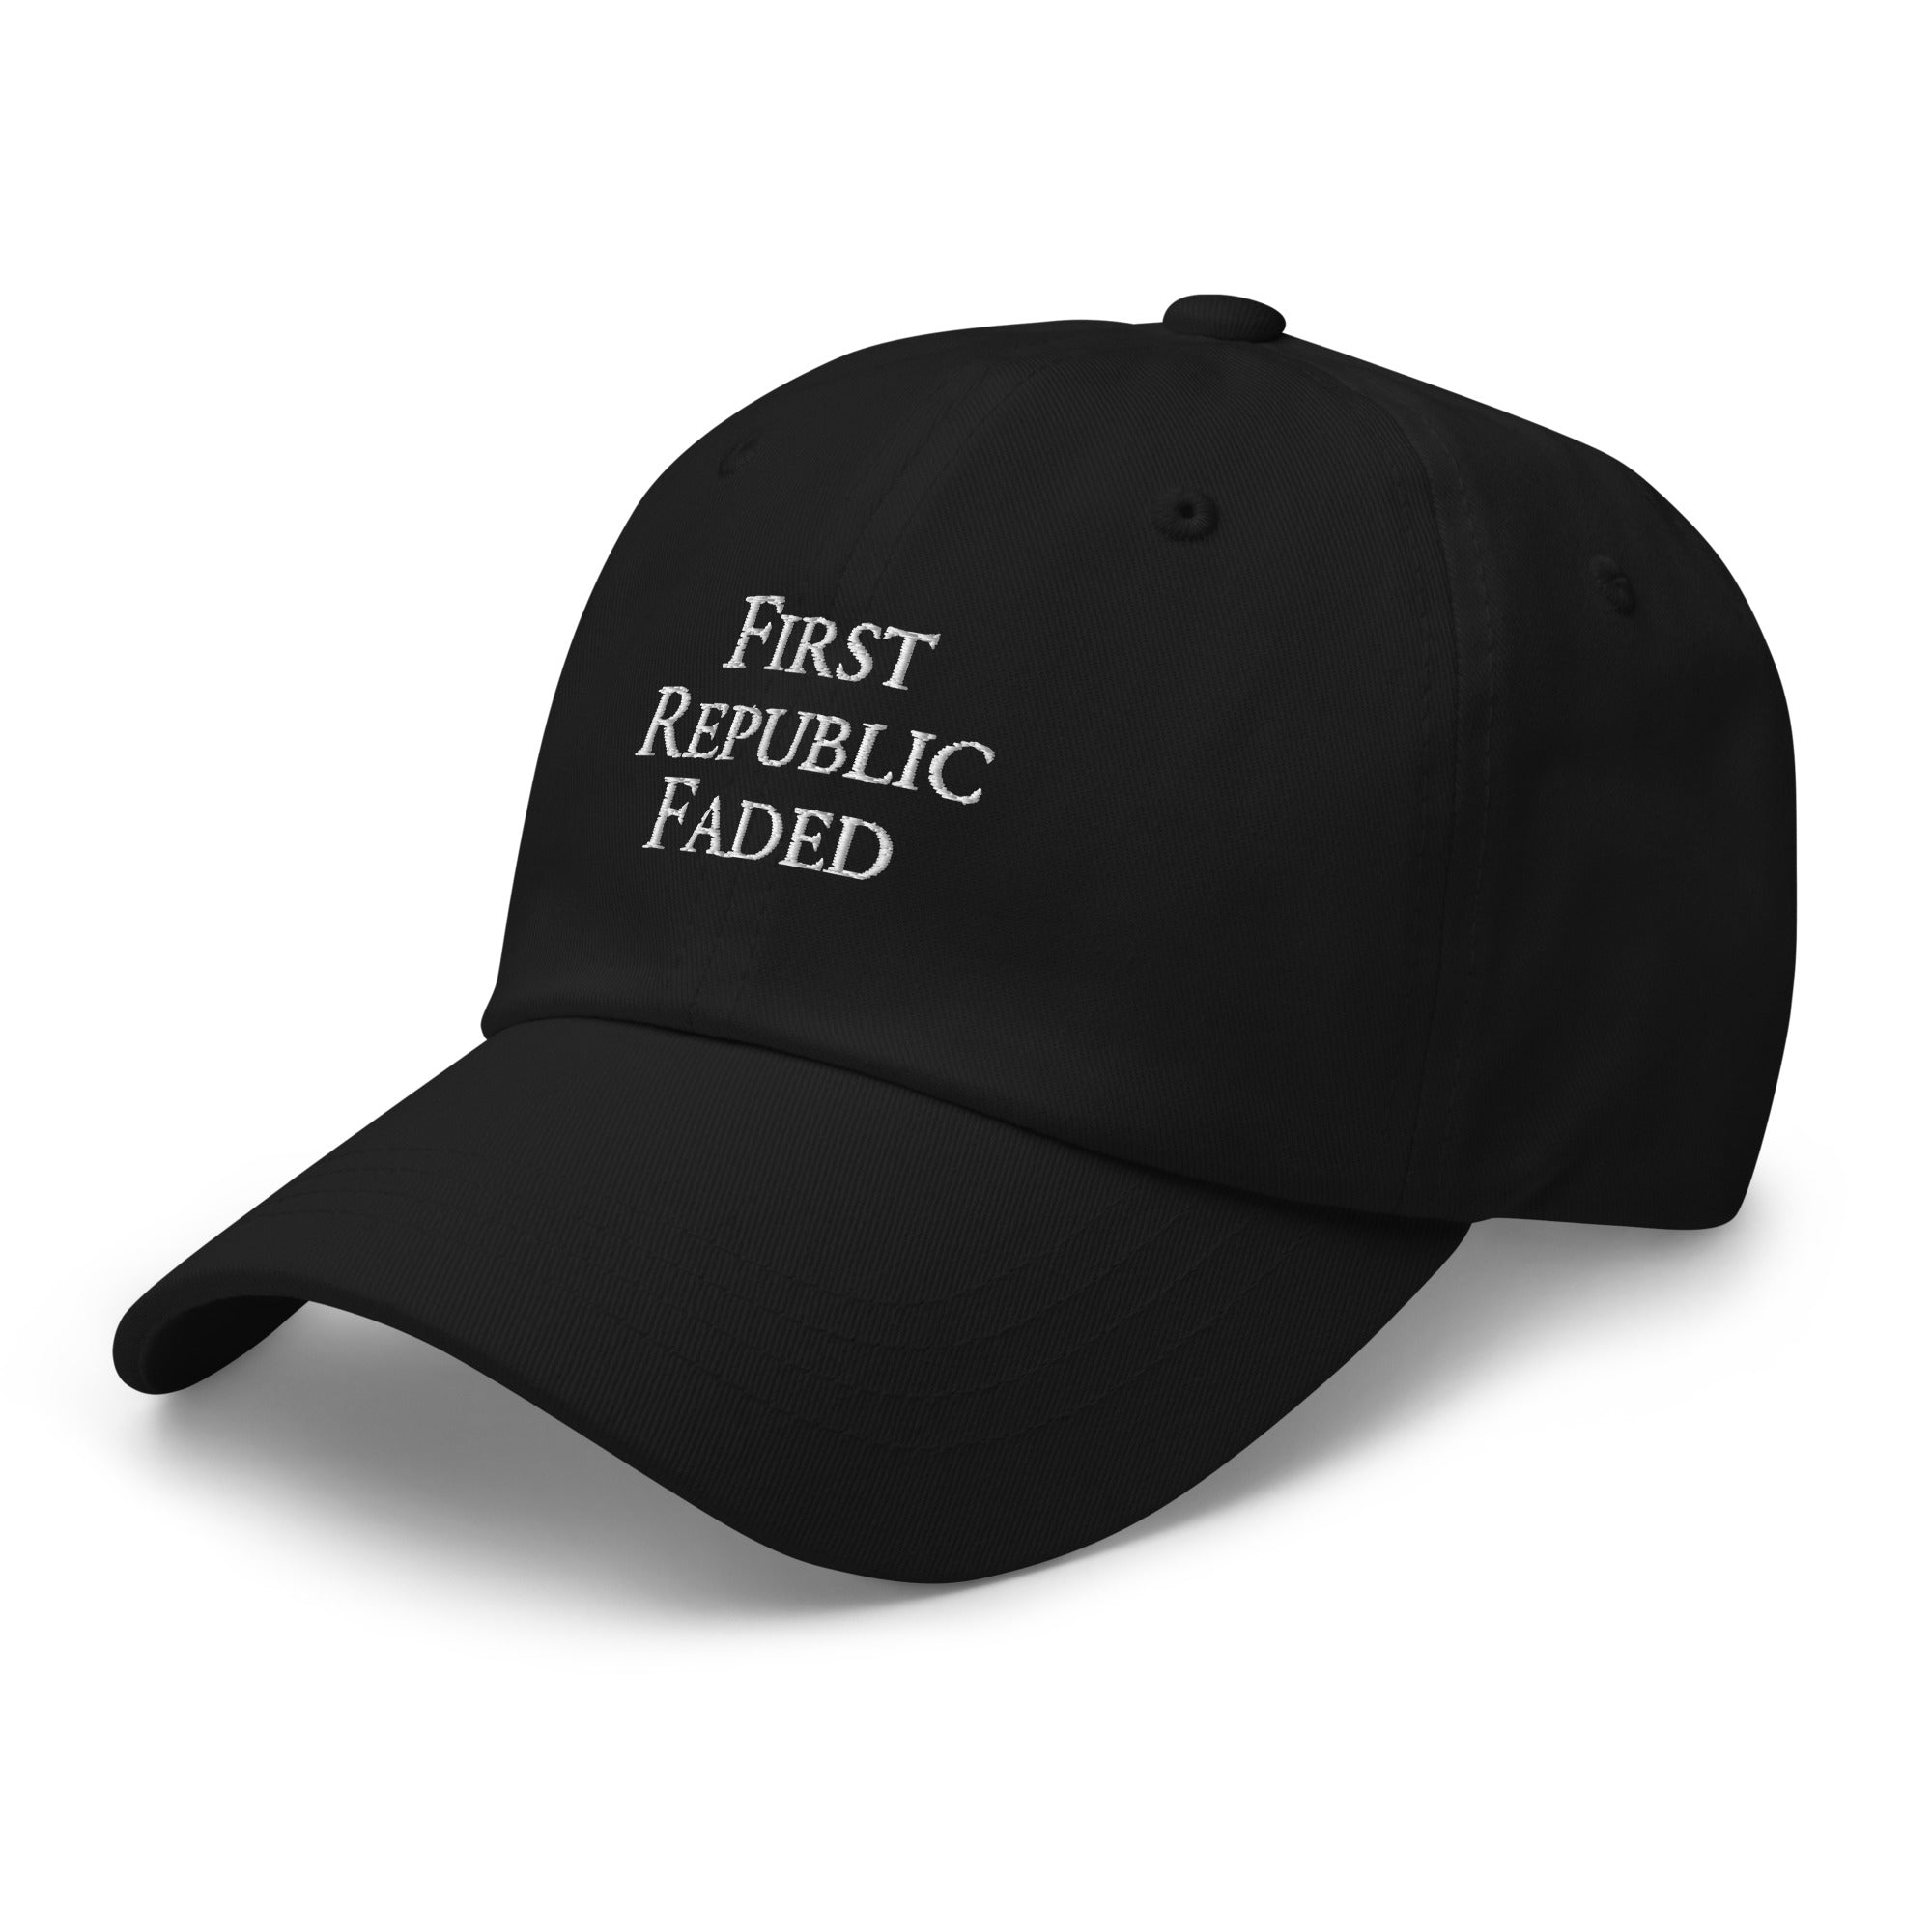 First Republic Faded Dad hat